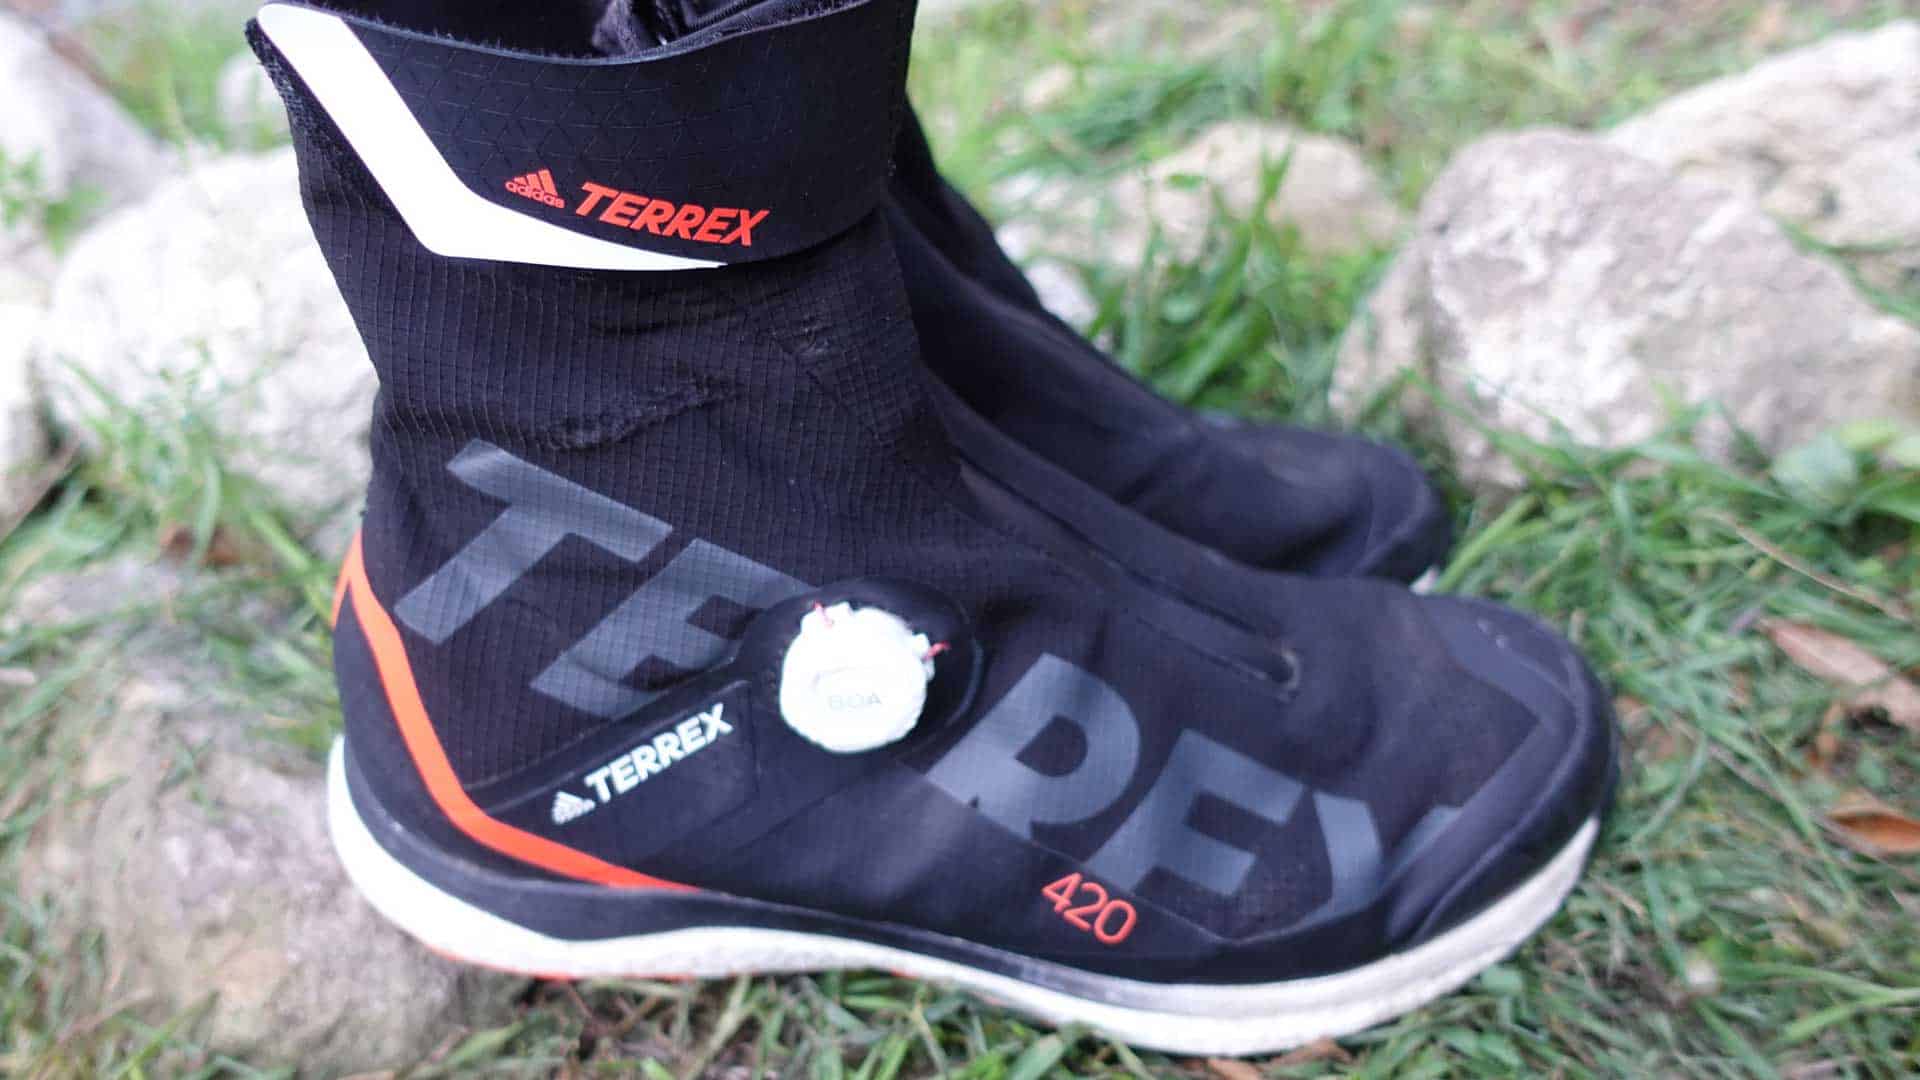 Review: Adidas Terrex Agravic Tech Pro (Winter) Trail Running